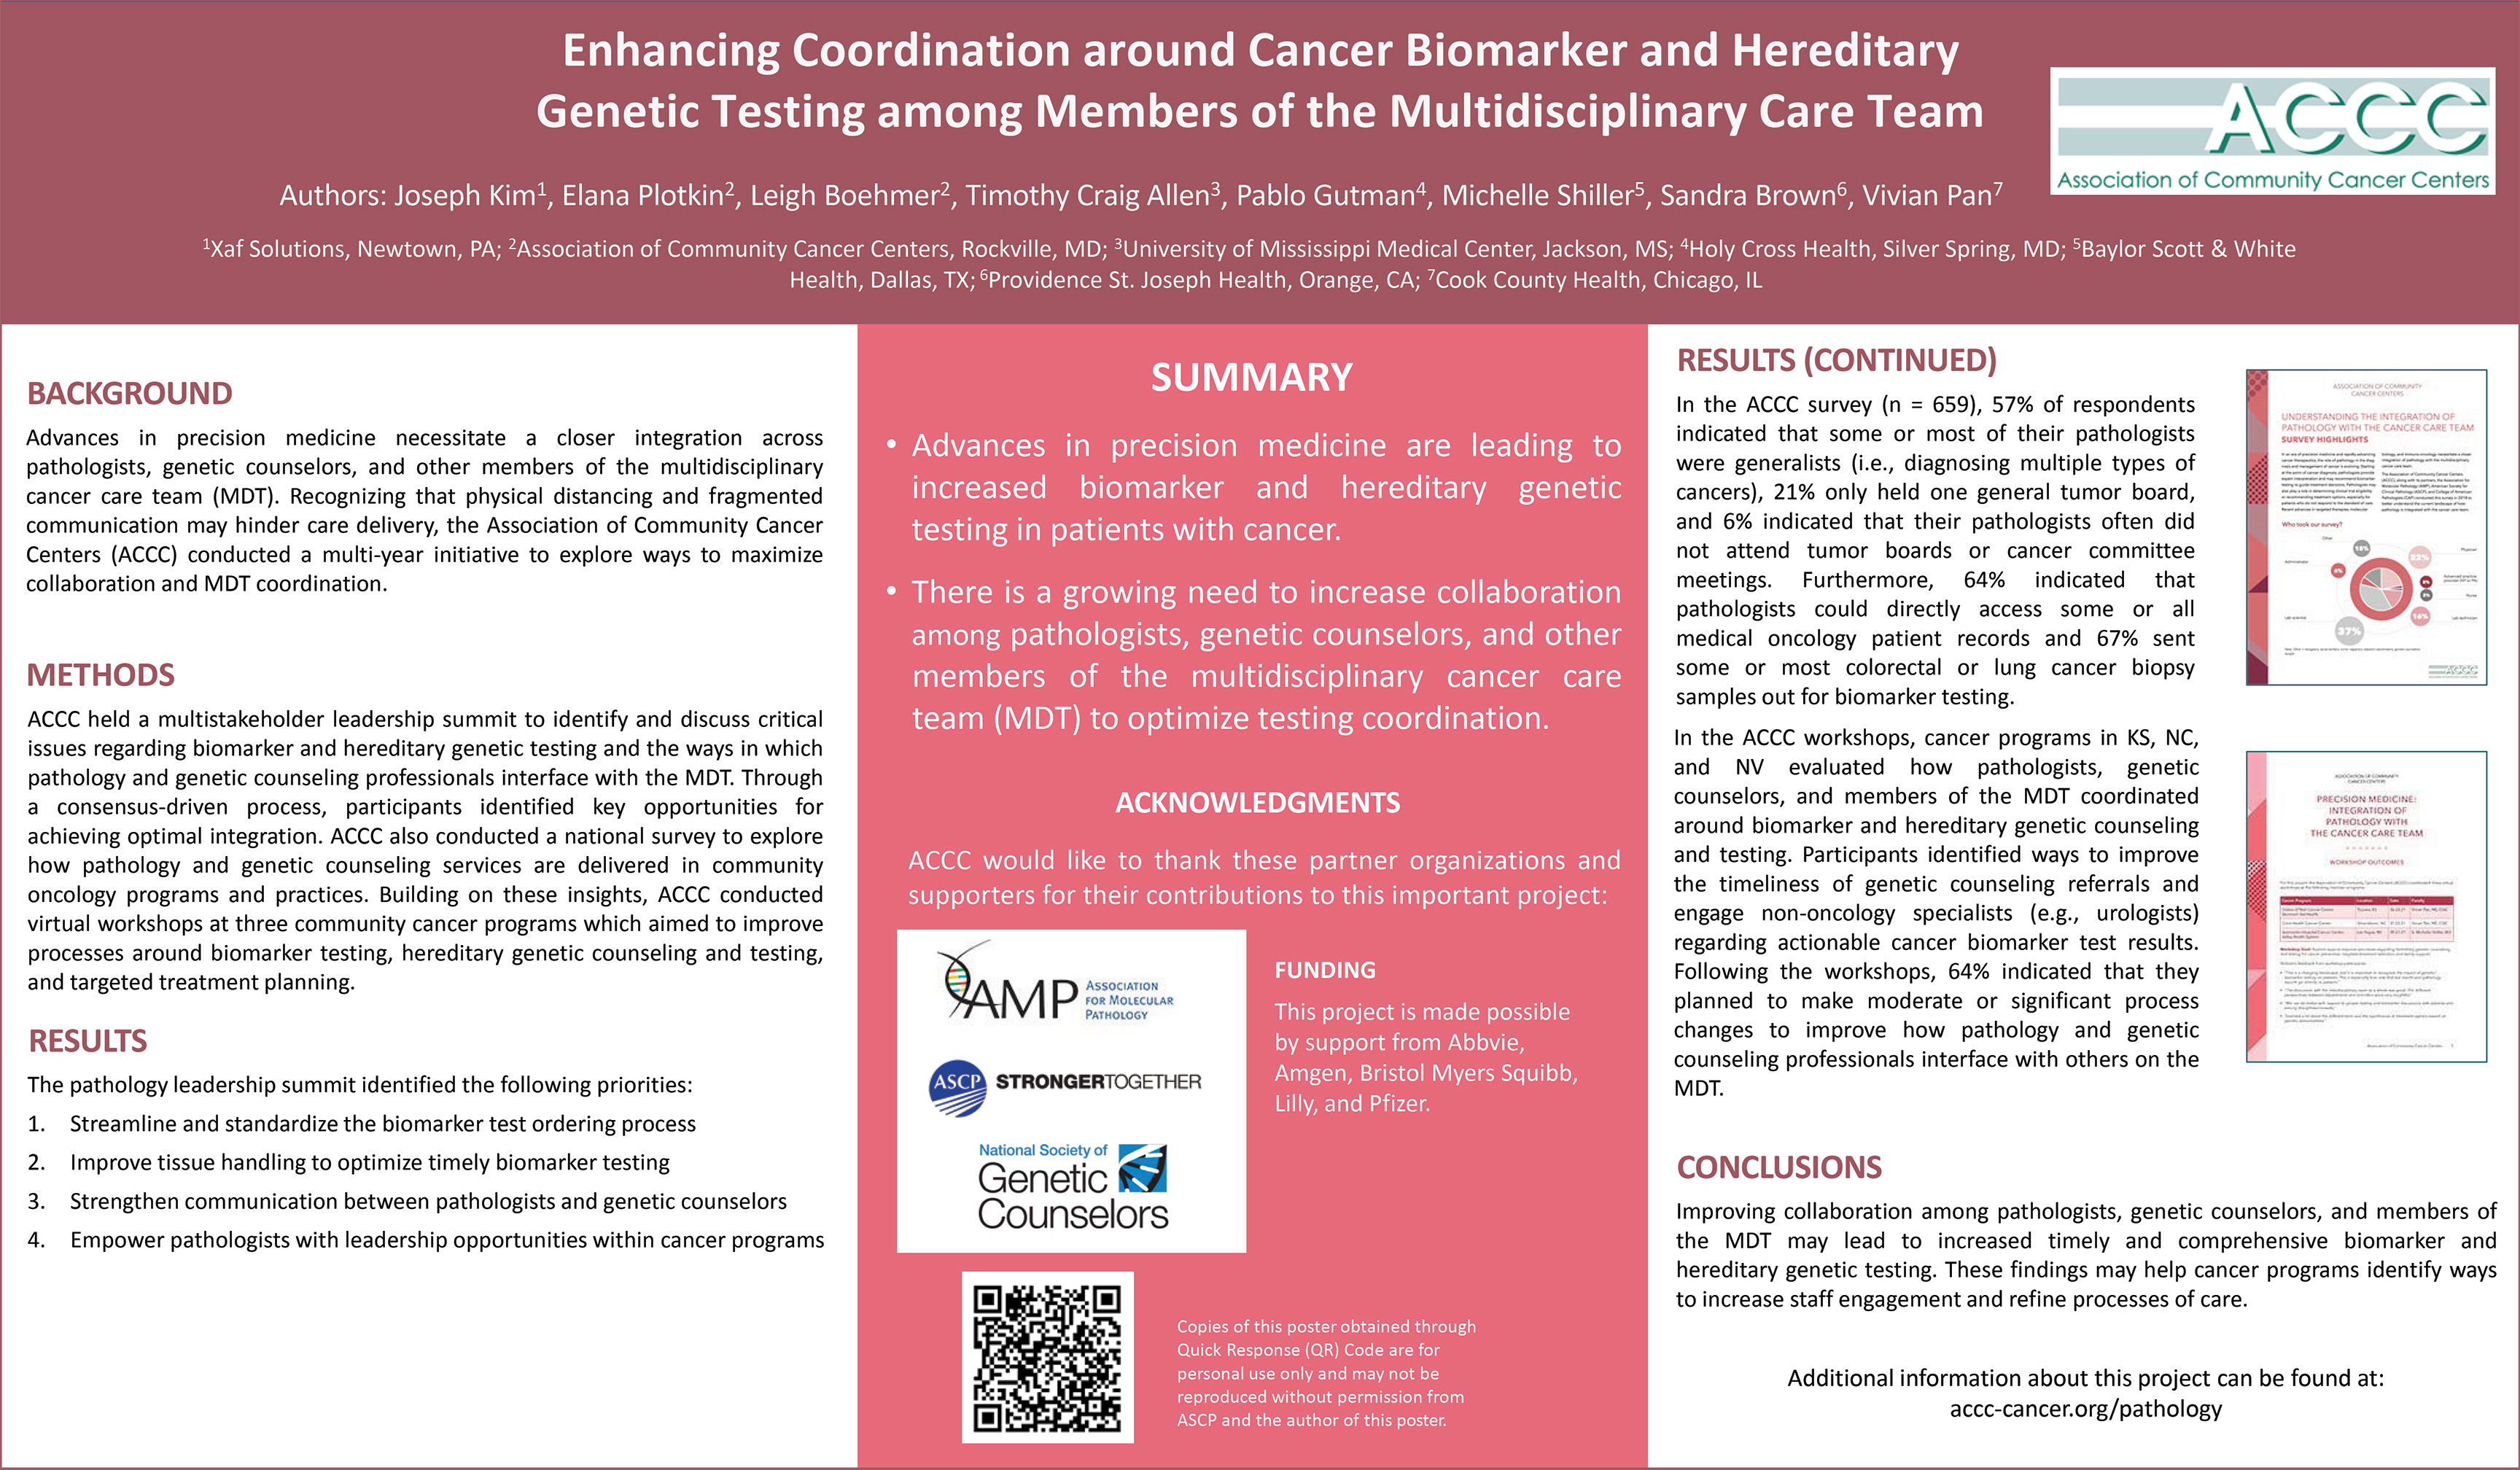 Enhancing Coordination around Cancer Biomarker and Hereditary Genetic Testing among Members of the Multidisciplinary Care Team